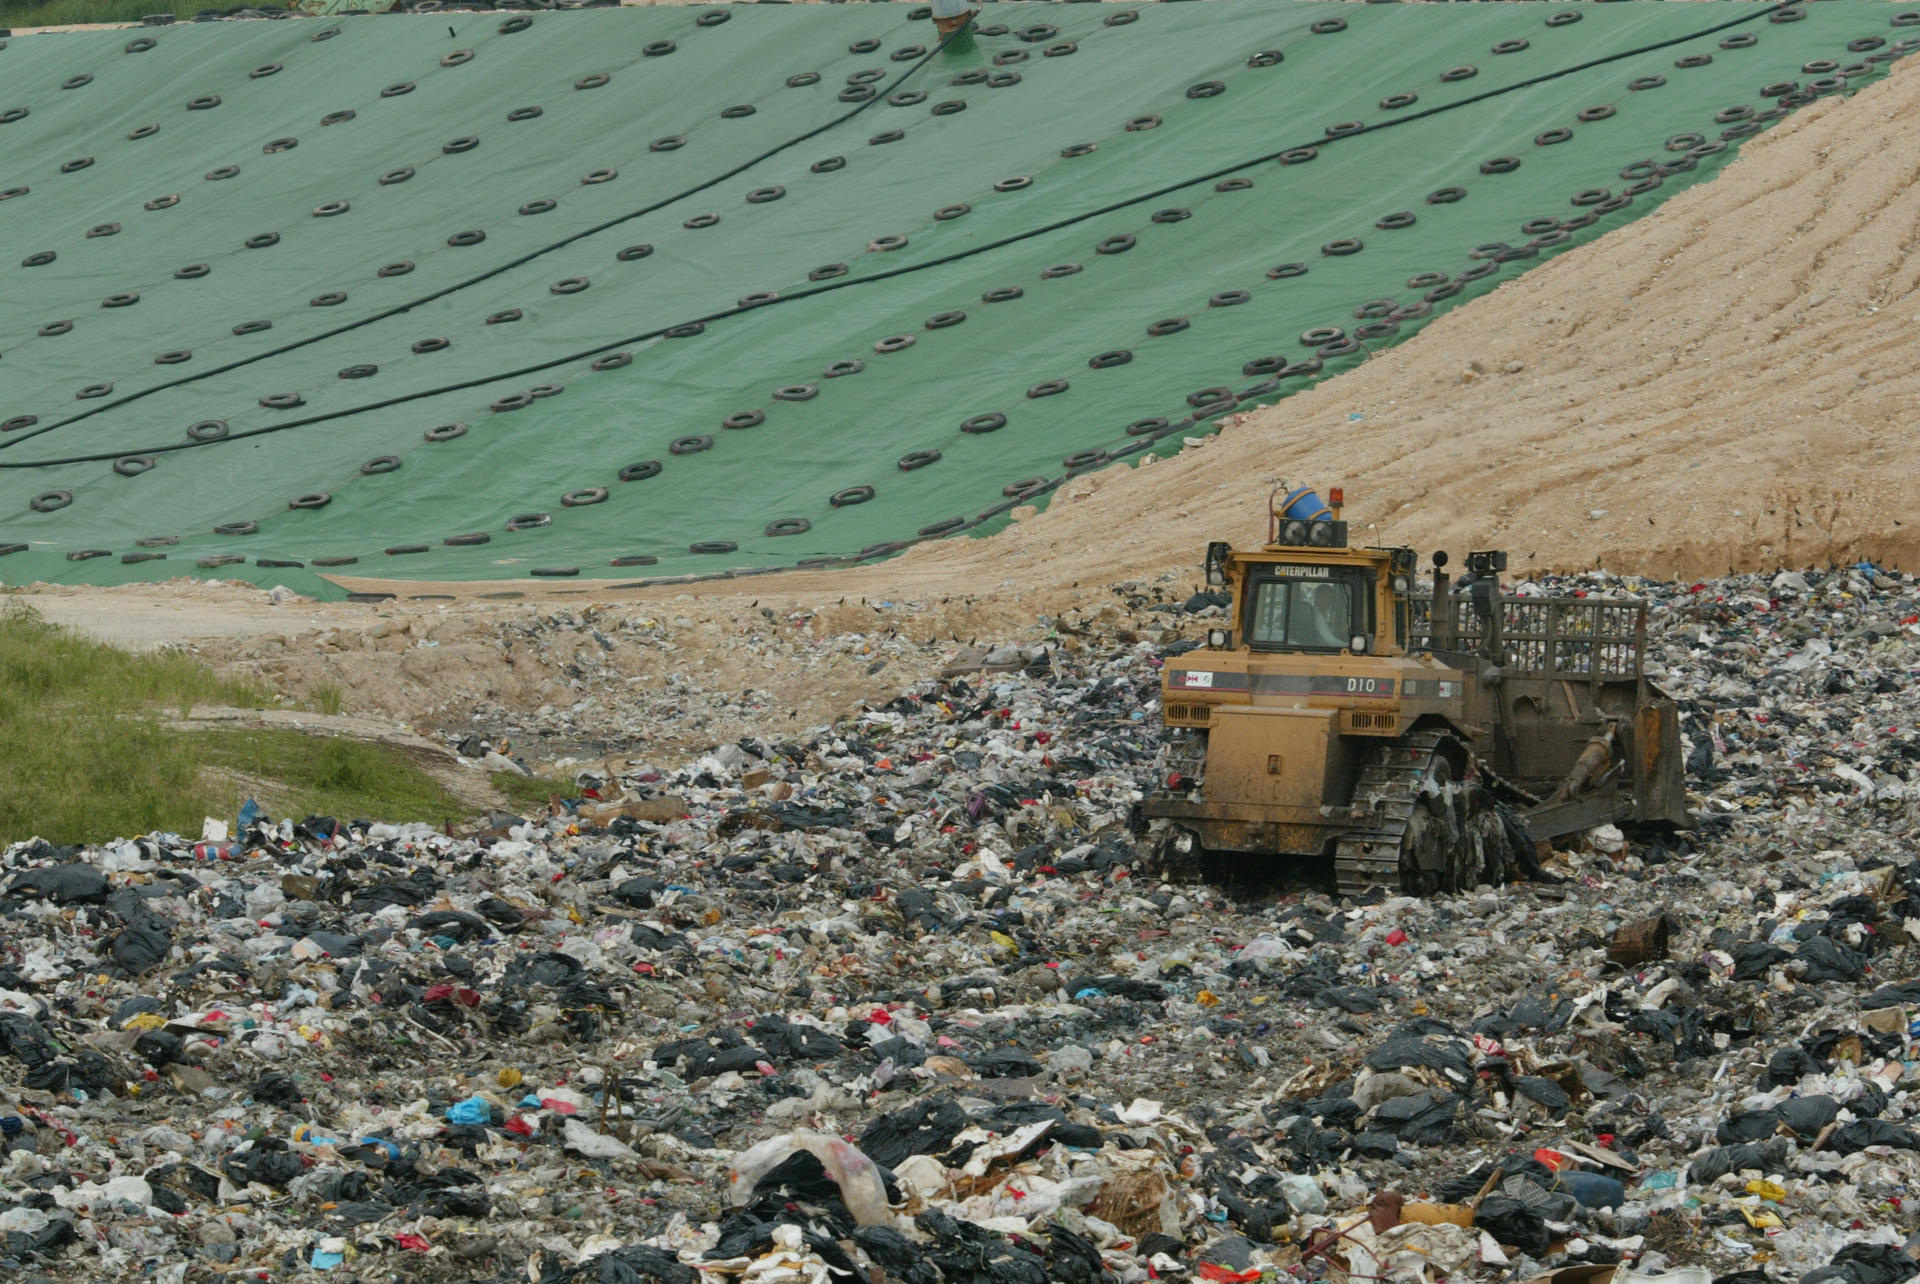 The landfill in Tuen Mun is one of the world's biggest dumps.